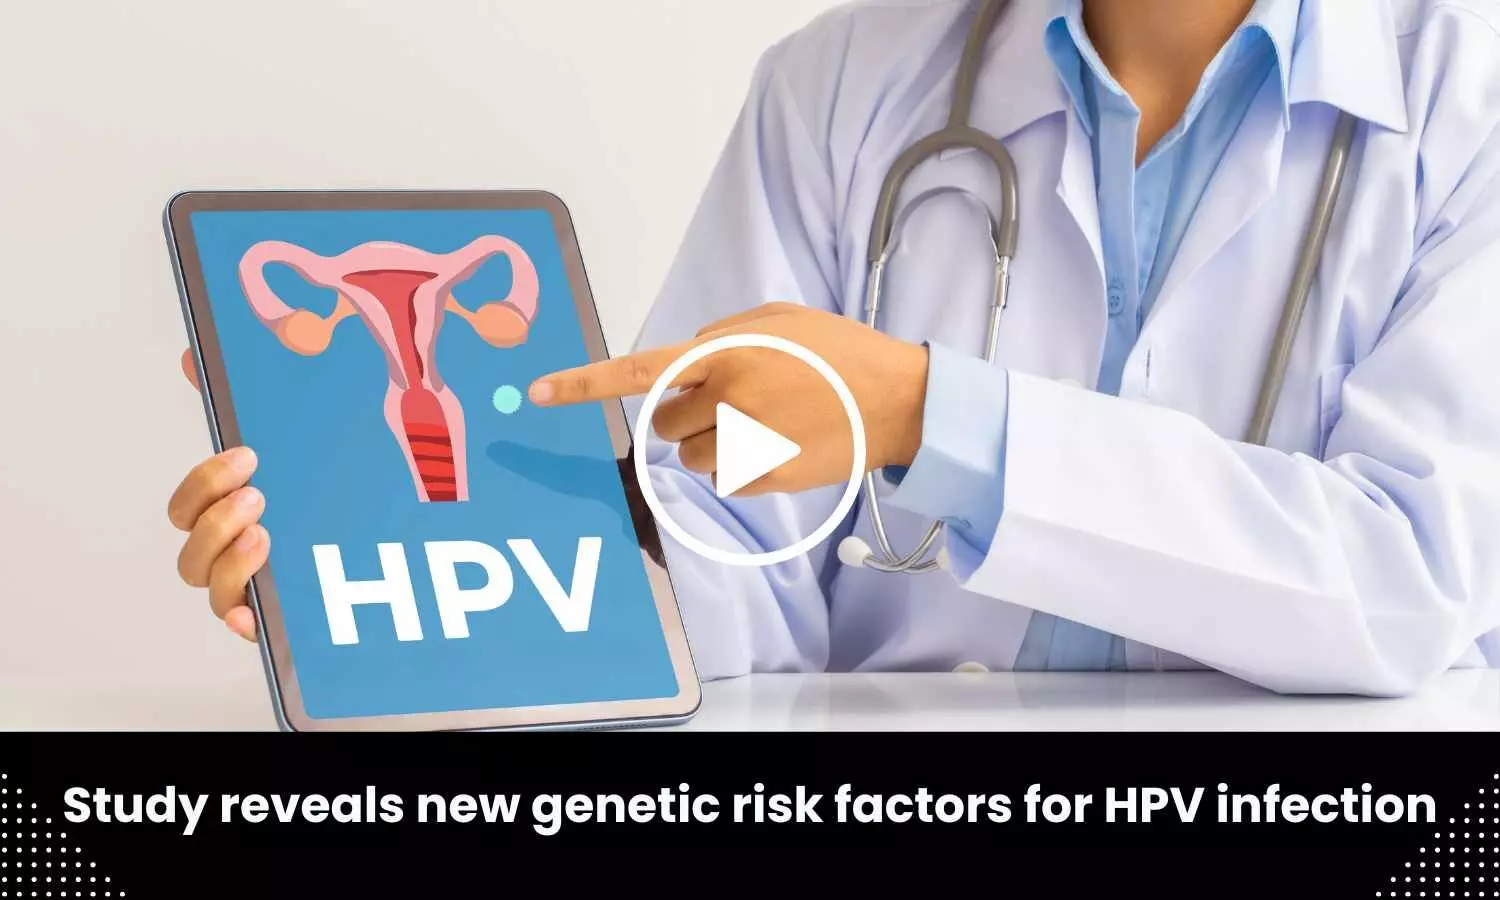 Study reveals new genetic risk factors for HPV infection